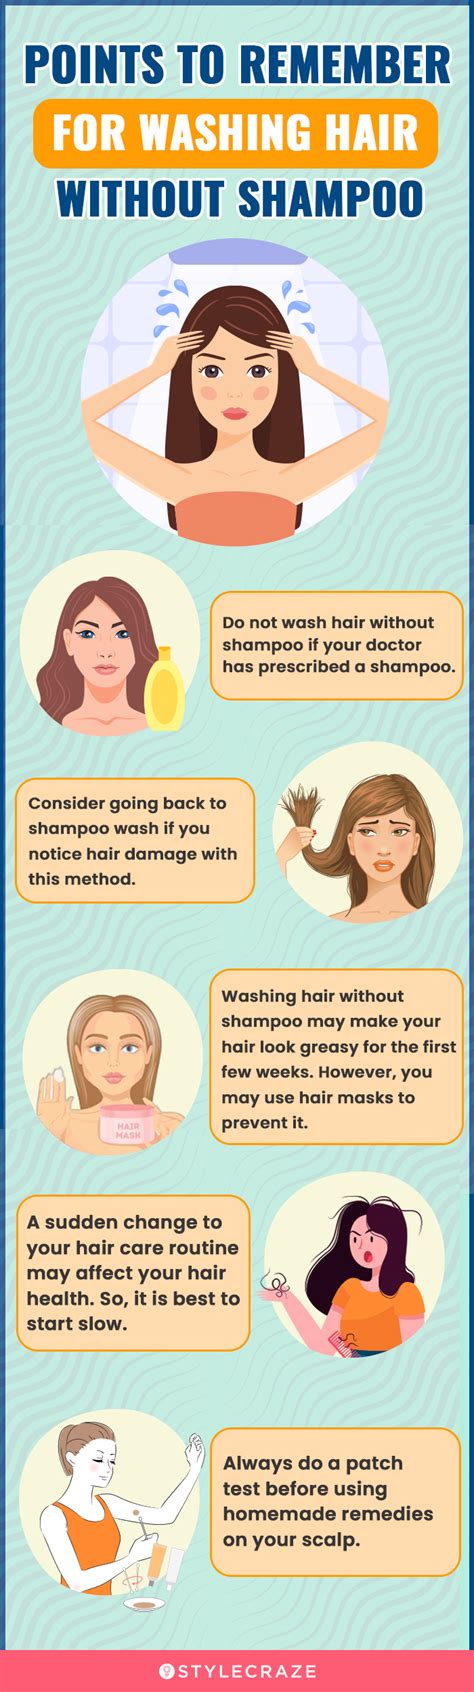 how to wash hair without shampoo 9 simple ways to try